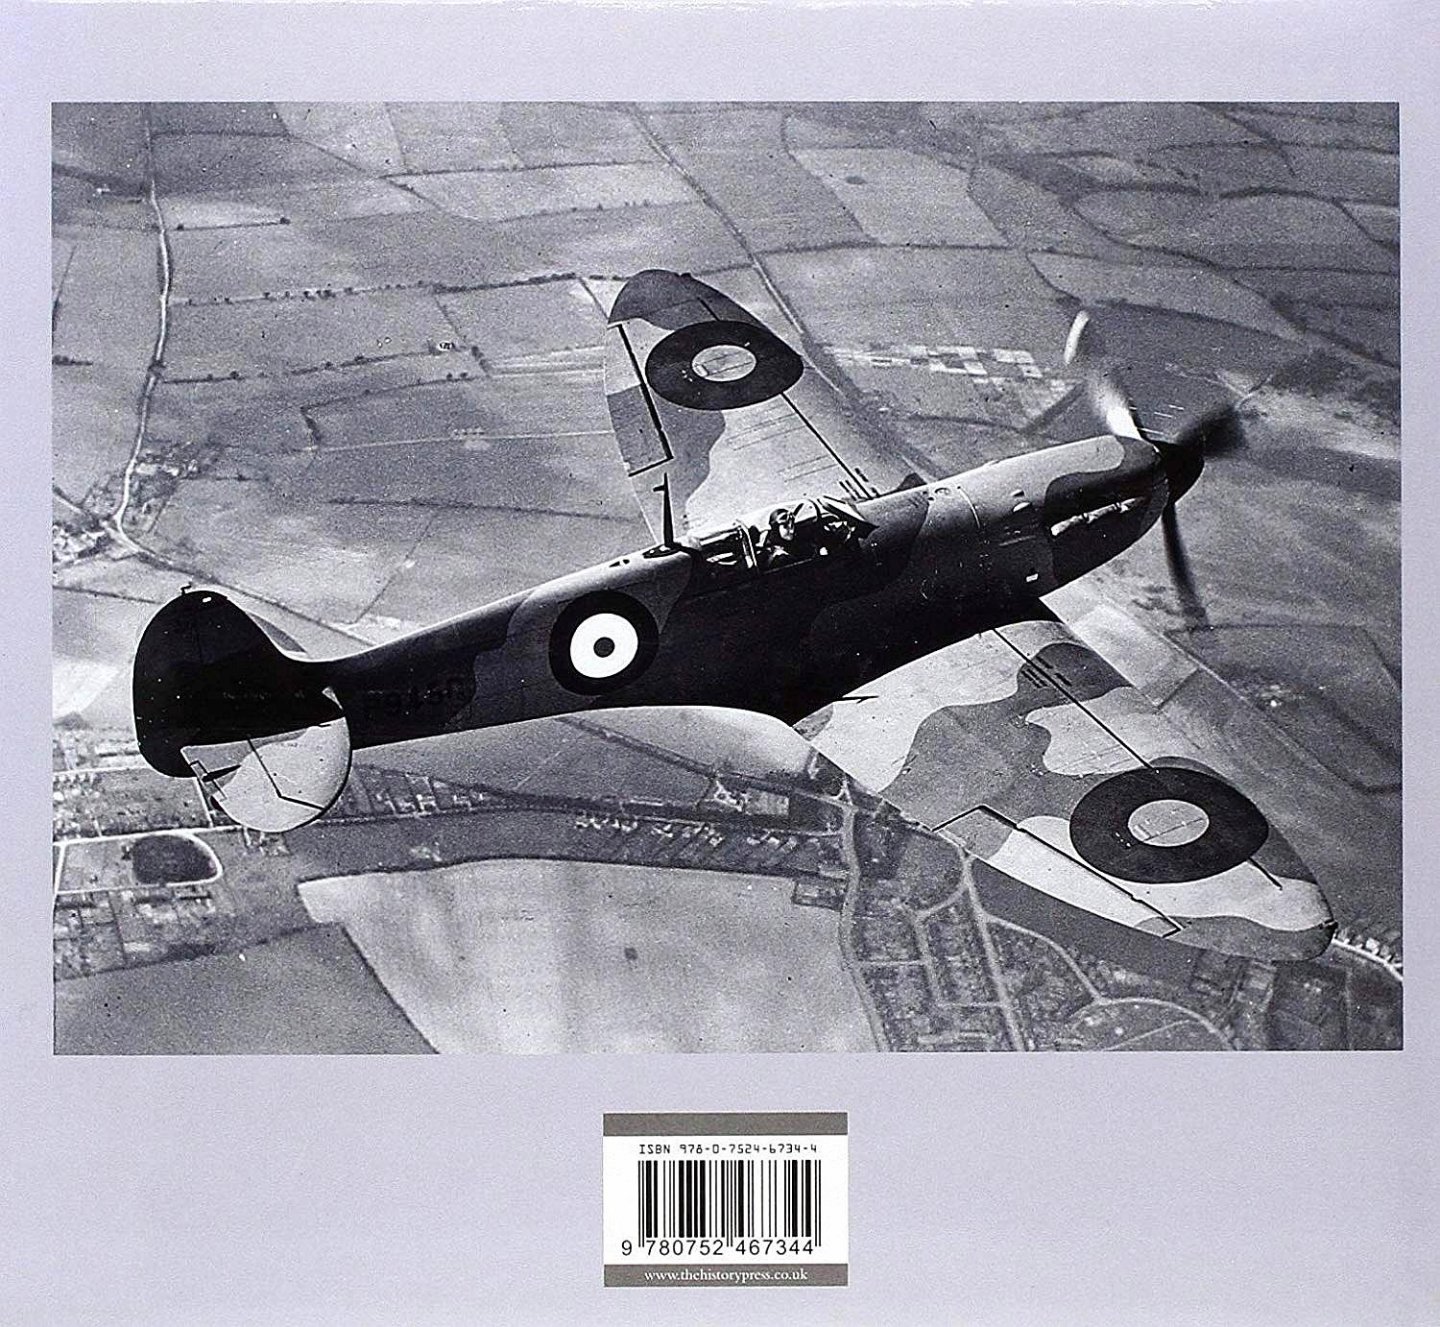 Price , Dr. Alfred . [ ISBN 9780752467344 ] - Spitfire . (  Queen of the Skies ; Pilots' Stories . )  The narrative description and condensed history of the Spitfire's construction, combat career and post-war service, bought together to tell the complete, concise history of the world's most